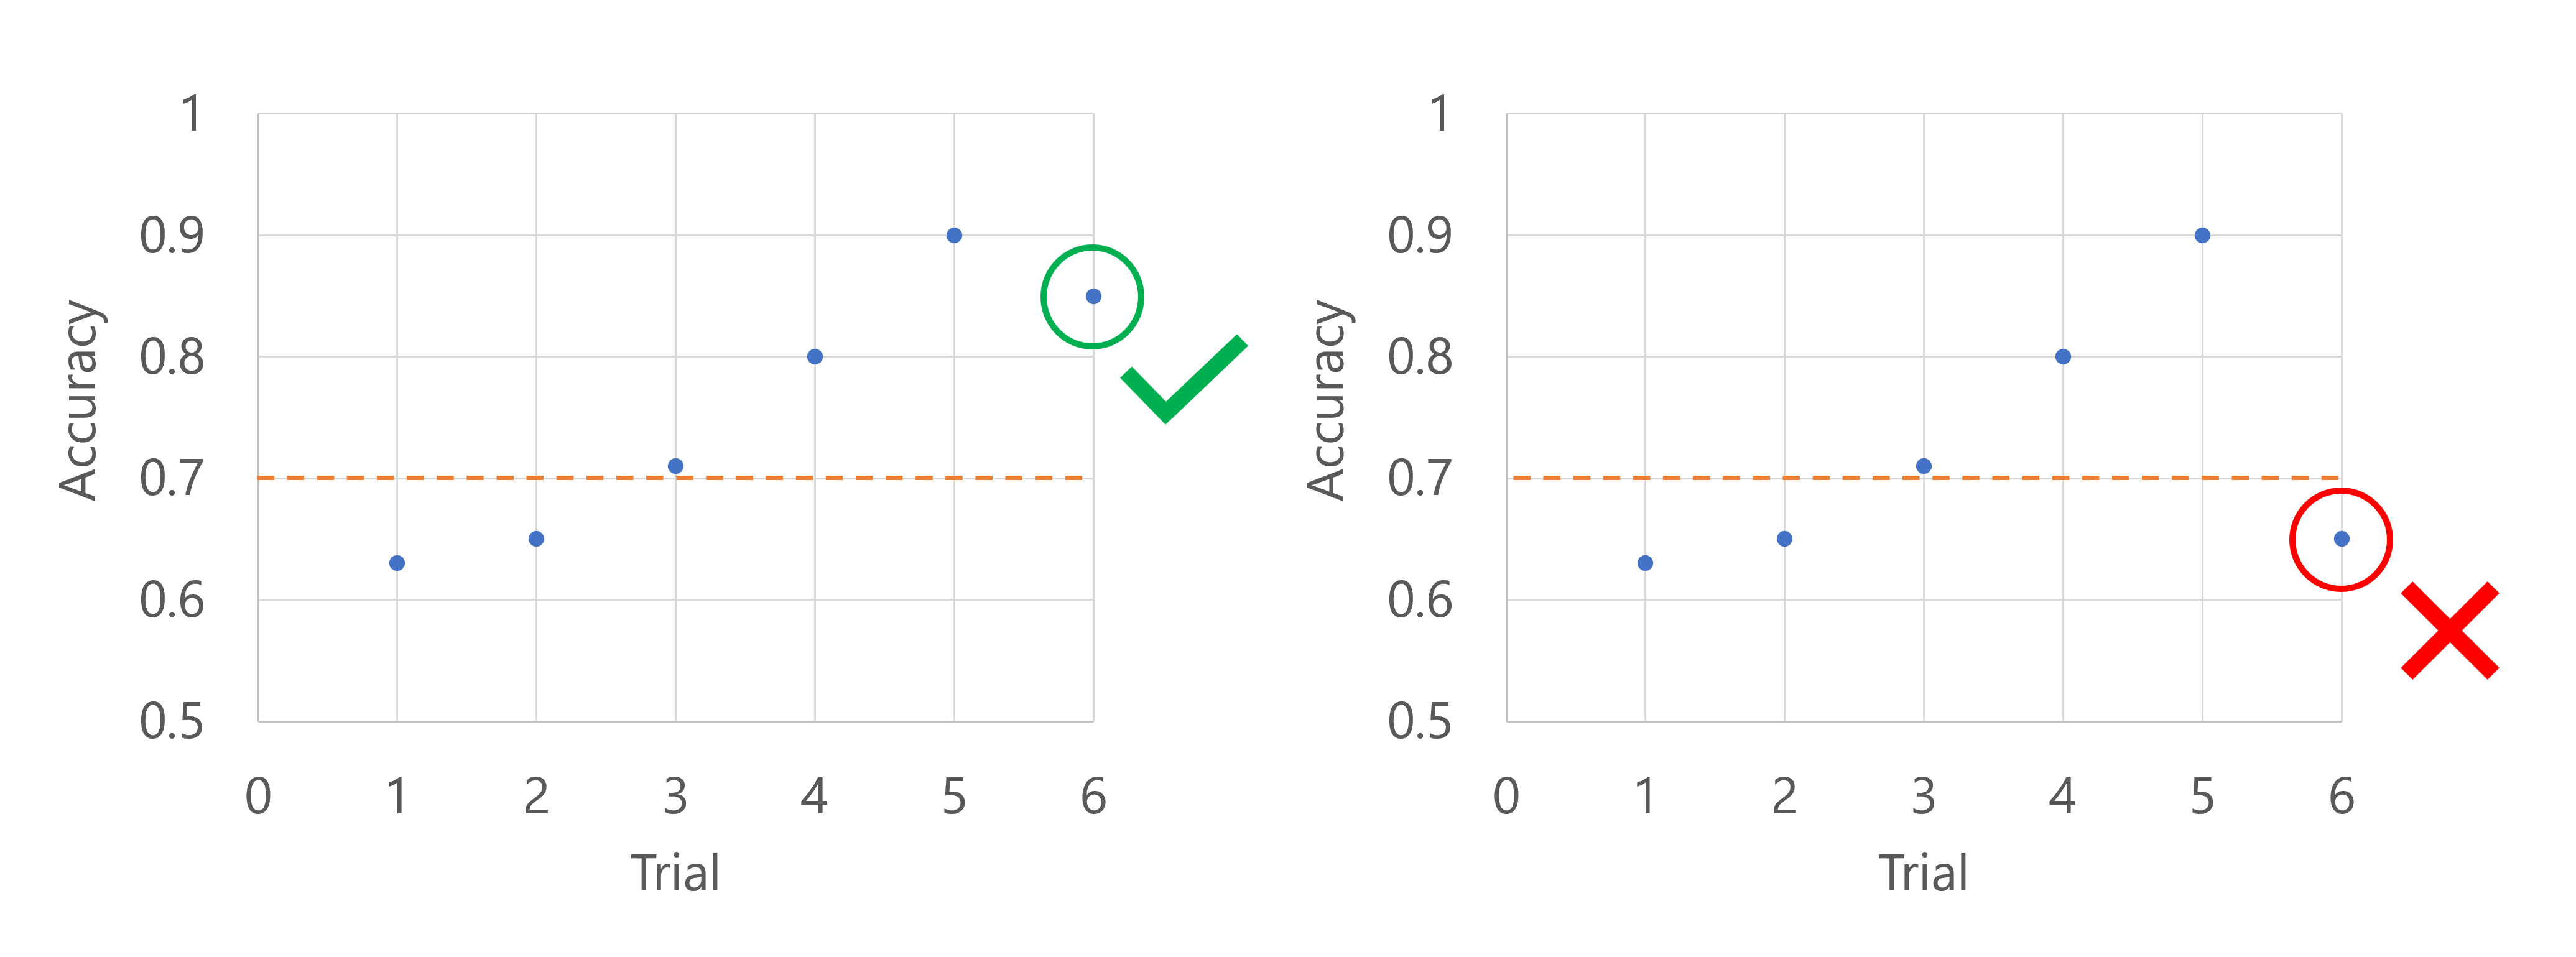 Diagram of two examples when using a bandit policy: one model performs sufficiently good, the other underperforms.